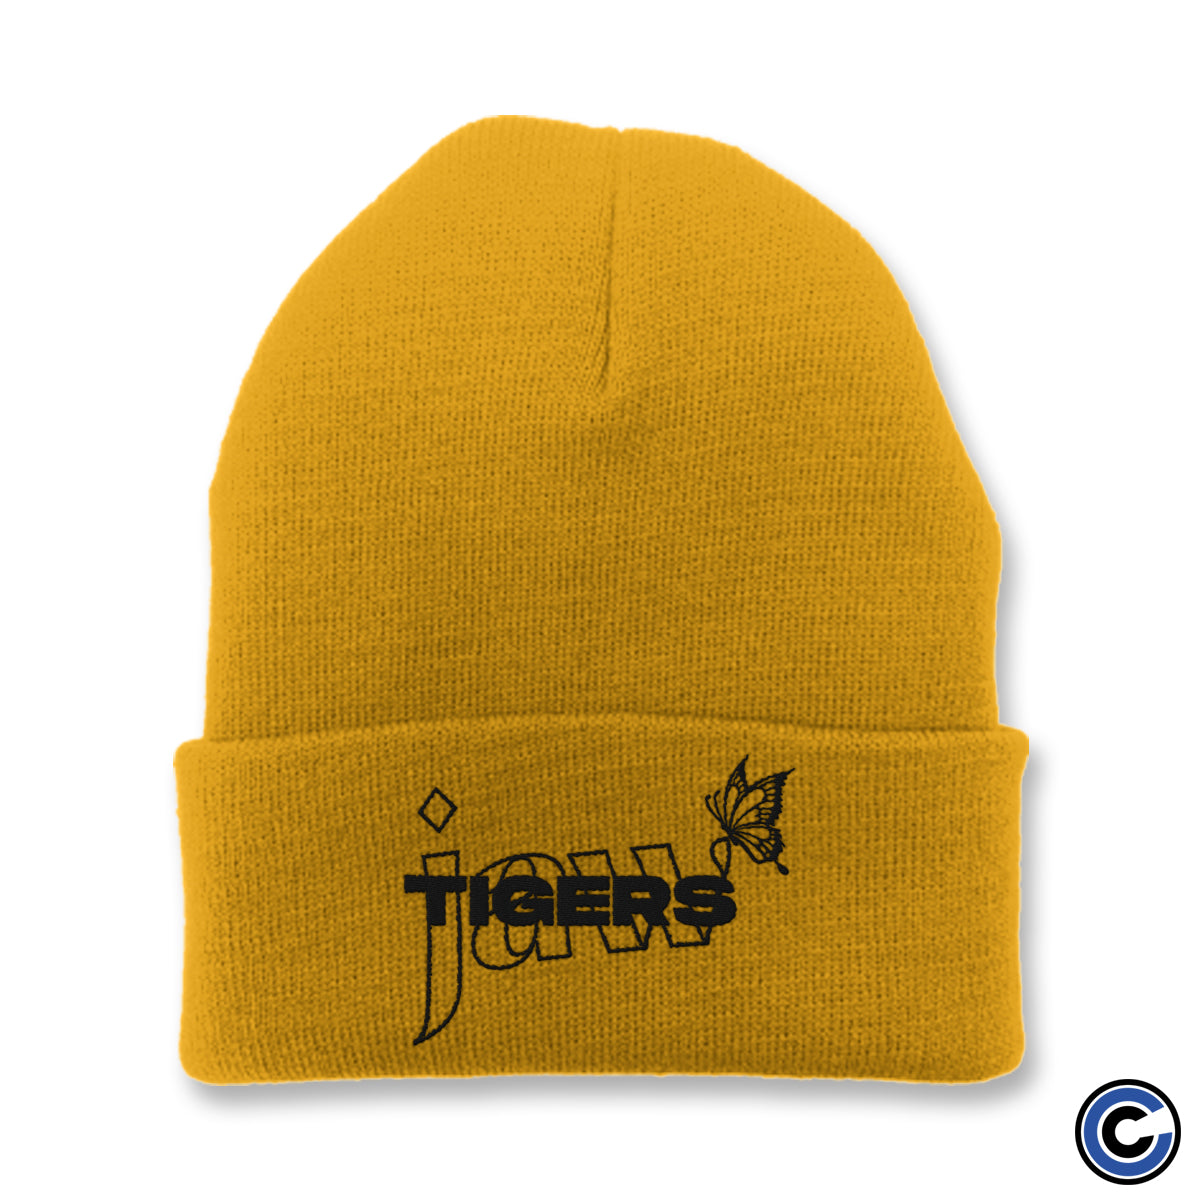 Tigers Jaw "Overlap Gold" Beanie